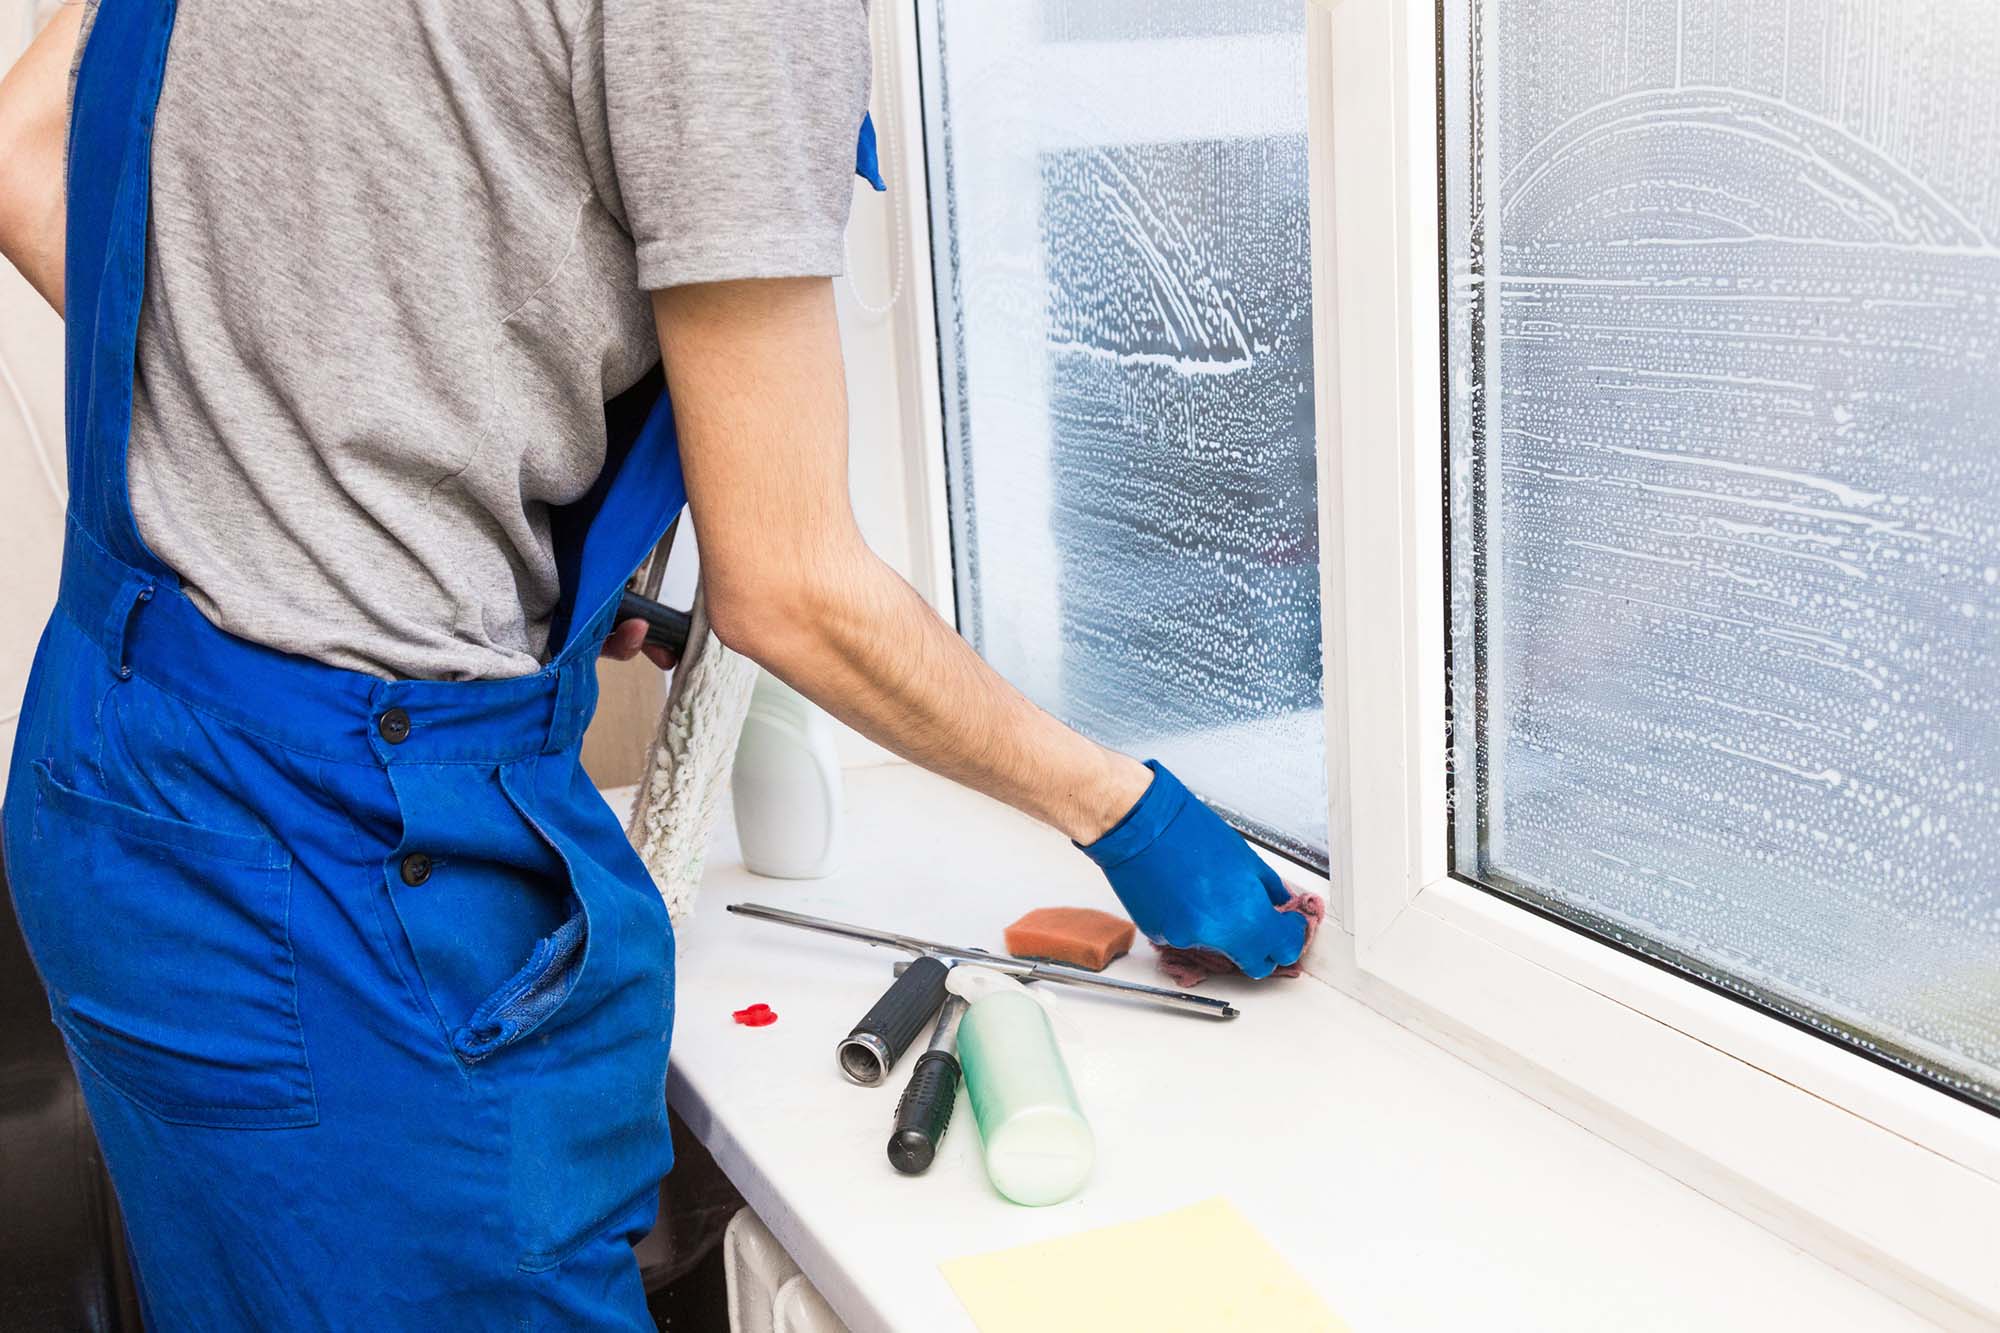 Close-up of a man in uniform and blue gloves washes a windows with window scraper. Professional home cleaning service.